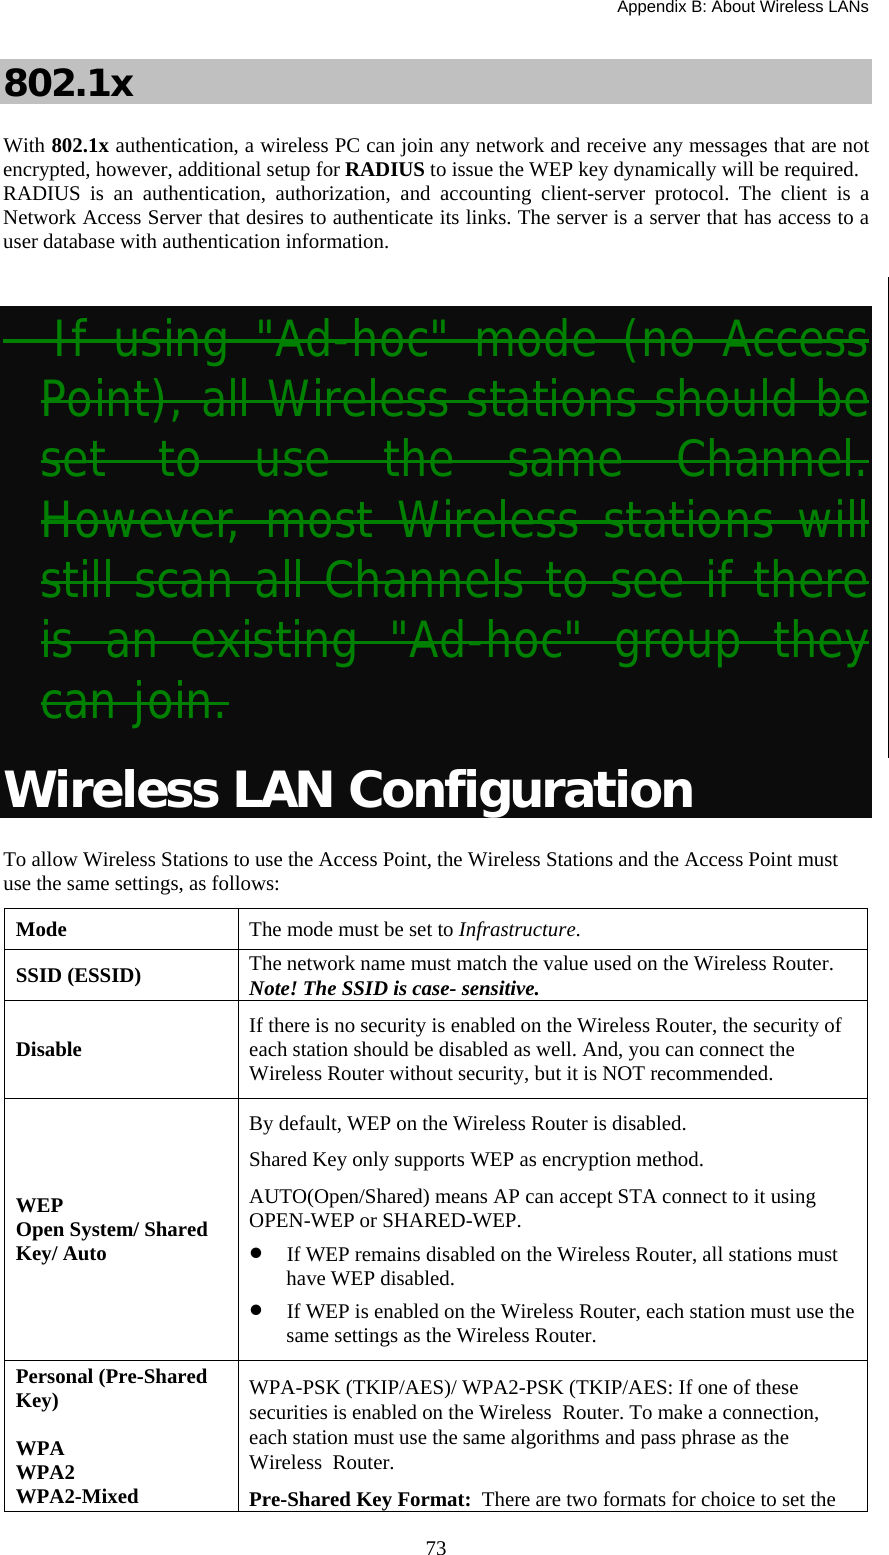 Appendix B: About Wireless LANs  73802.1x With 802.1x authentication, a wireless PC can join any network and receive any messages that are not encrypted, however, additional setup for RADIUS to issue the WEP key dynamically will be required. RADIUS is an authentication, authorization, and accounting client-server protocol. The client is a Network Access Server that desires to authenticate its links. The server is a server that has access to a user database with authentication information.  　If using &quot;Ad-hoc&quot; mode (no Access Point), all Wireless stations should be set to use the same Channel. However, most Wireless stations will still scan all Channels to see if there is an existing &quot;Ad-hoc&quot; group they can join. Wireless LAN Configuration To allow Wireless Stations to use the Access Point, the Wireless Stations and the Access Point must use the same settings, as follows: Mode  The mode must be set to Infrastructure. SSID (ESSID)  The network name must match the value used on the Wireless Router. Note! The SSID is case- sensitive. Disable  If there is no security is enabled on the Wireless Router, the security of each station should be disabled as well. And, you can connect the Wireless Router without security, but it is NOT recommended. WEP  Open System/ Shared Key/ Auto By default, WEP on the Wireless Router is disabled. Shared Key only supports WEP as encryption method. AUTO(Open/Shared) means AP can accept STA connect to it using OPEN-WEP or SHARED-WEP. •  If WEP remains disabled on the Wireless Router, all stations must have WEP disabled. •  If WEP is enabled on the Wireless Router, each station must use the same settings as the Wireless Router. Personal (Pre-Shared Key)  WPA WPA2 WPA2-Mixed WPA-PSK (TKIP/AES)/ WPA2-PSK (TKIP/AES: If one of these securities is enabled on the Wireless  Router. To make a connection, each station must use the same algorithms and pass phrase as the Wireless  Router. Pre-Shared KeyFormat:  There are two formats for choice to set the 